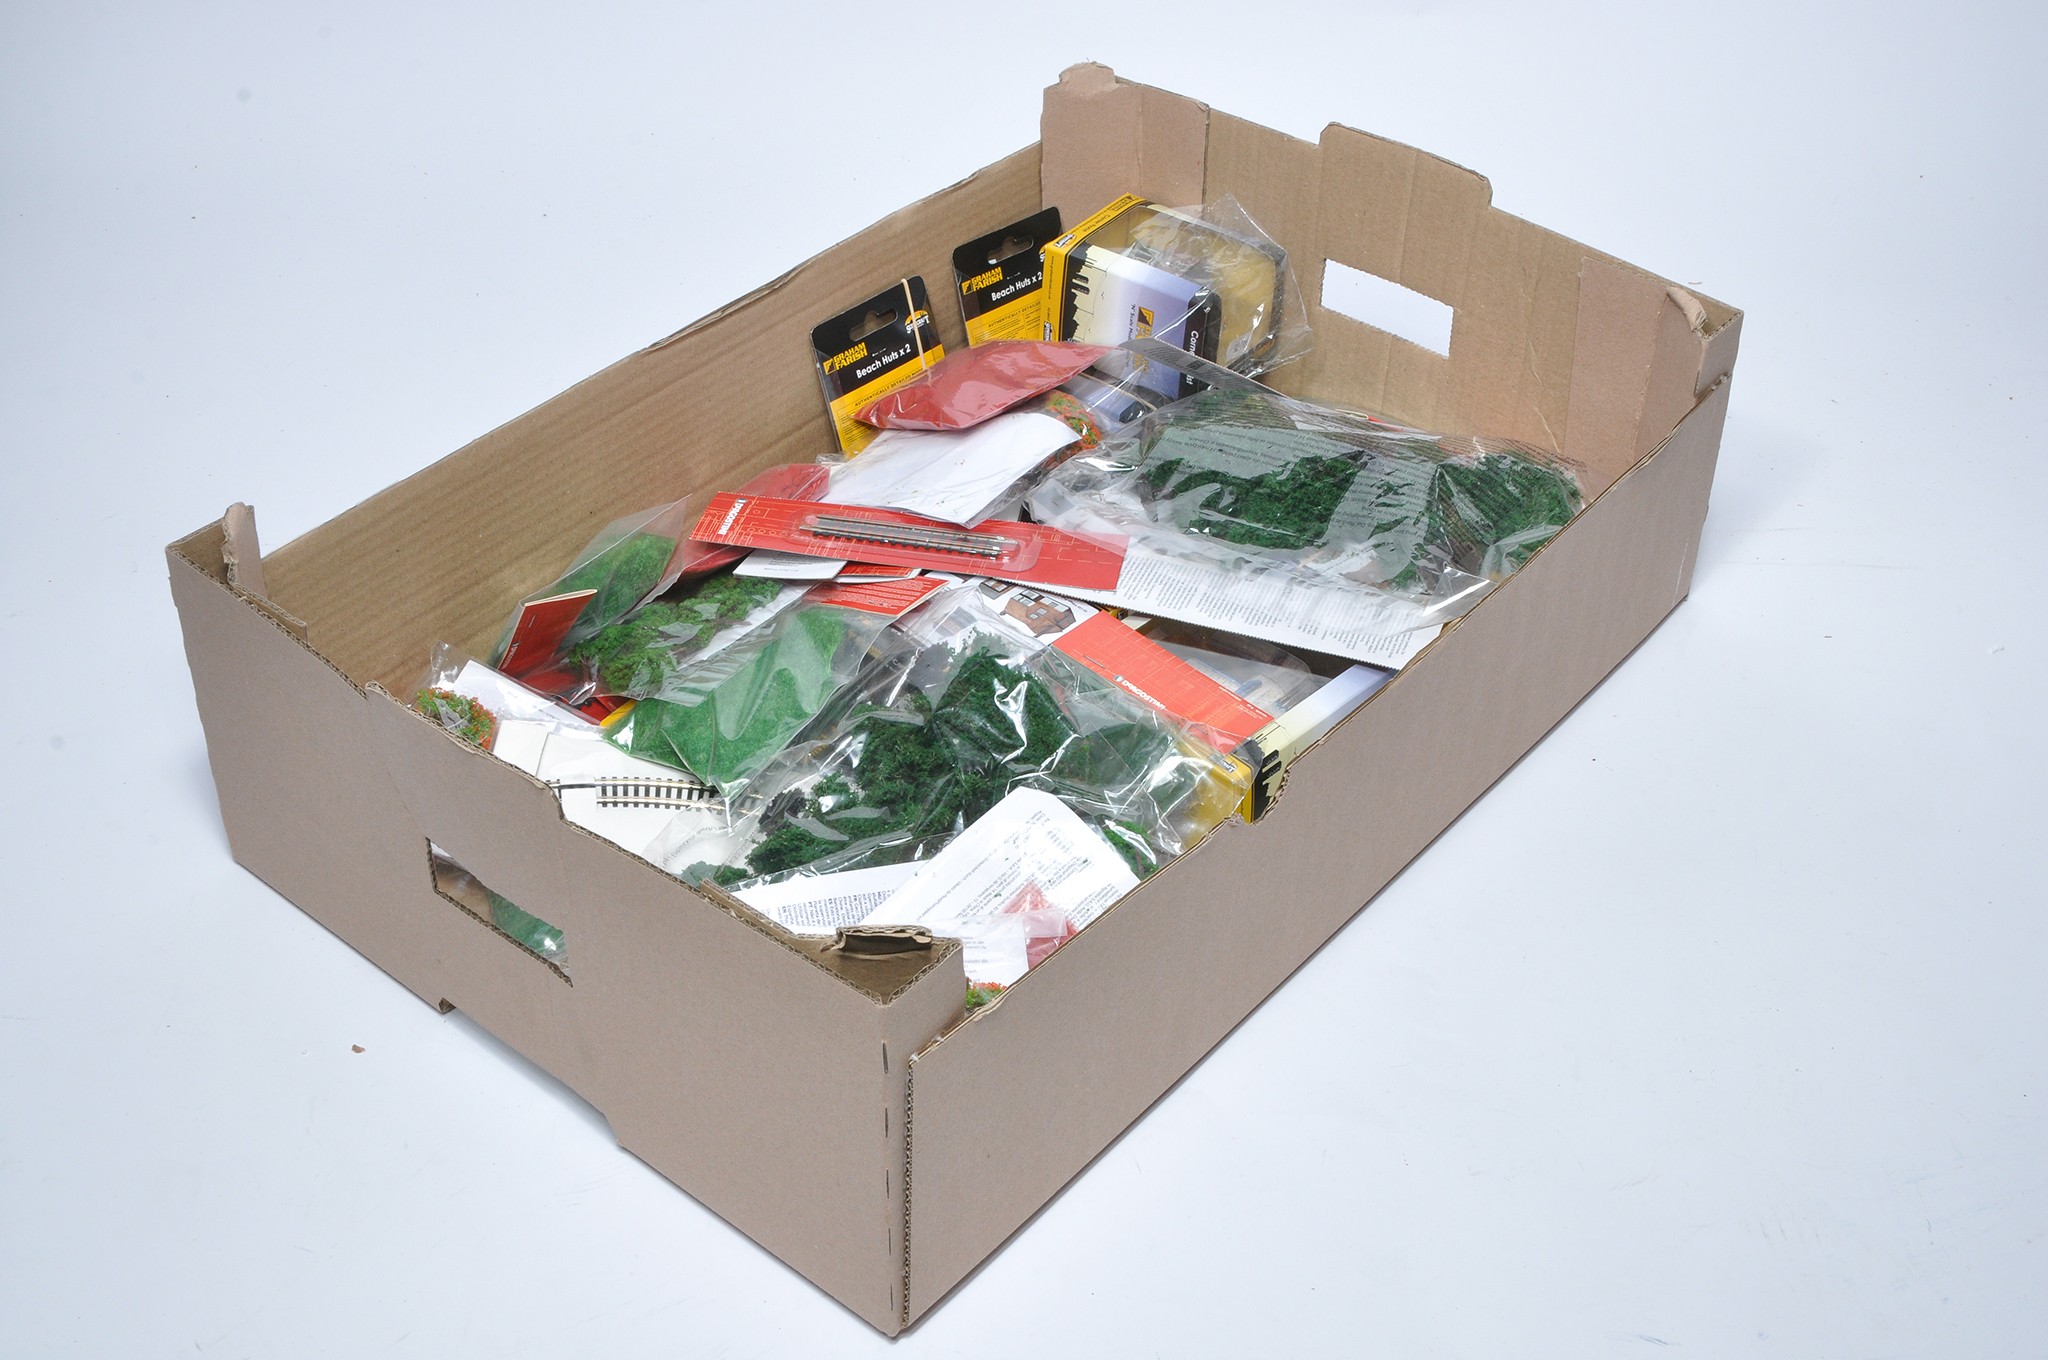 A quantity of unused model railway accessory items including mostly scenic pieces, as shown.